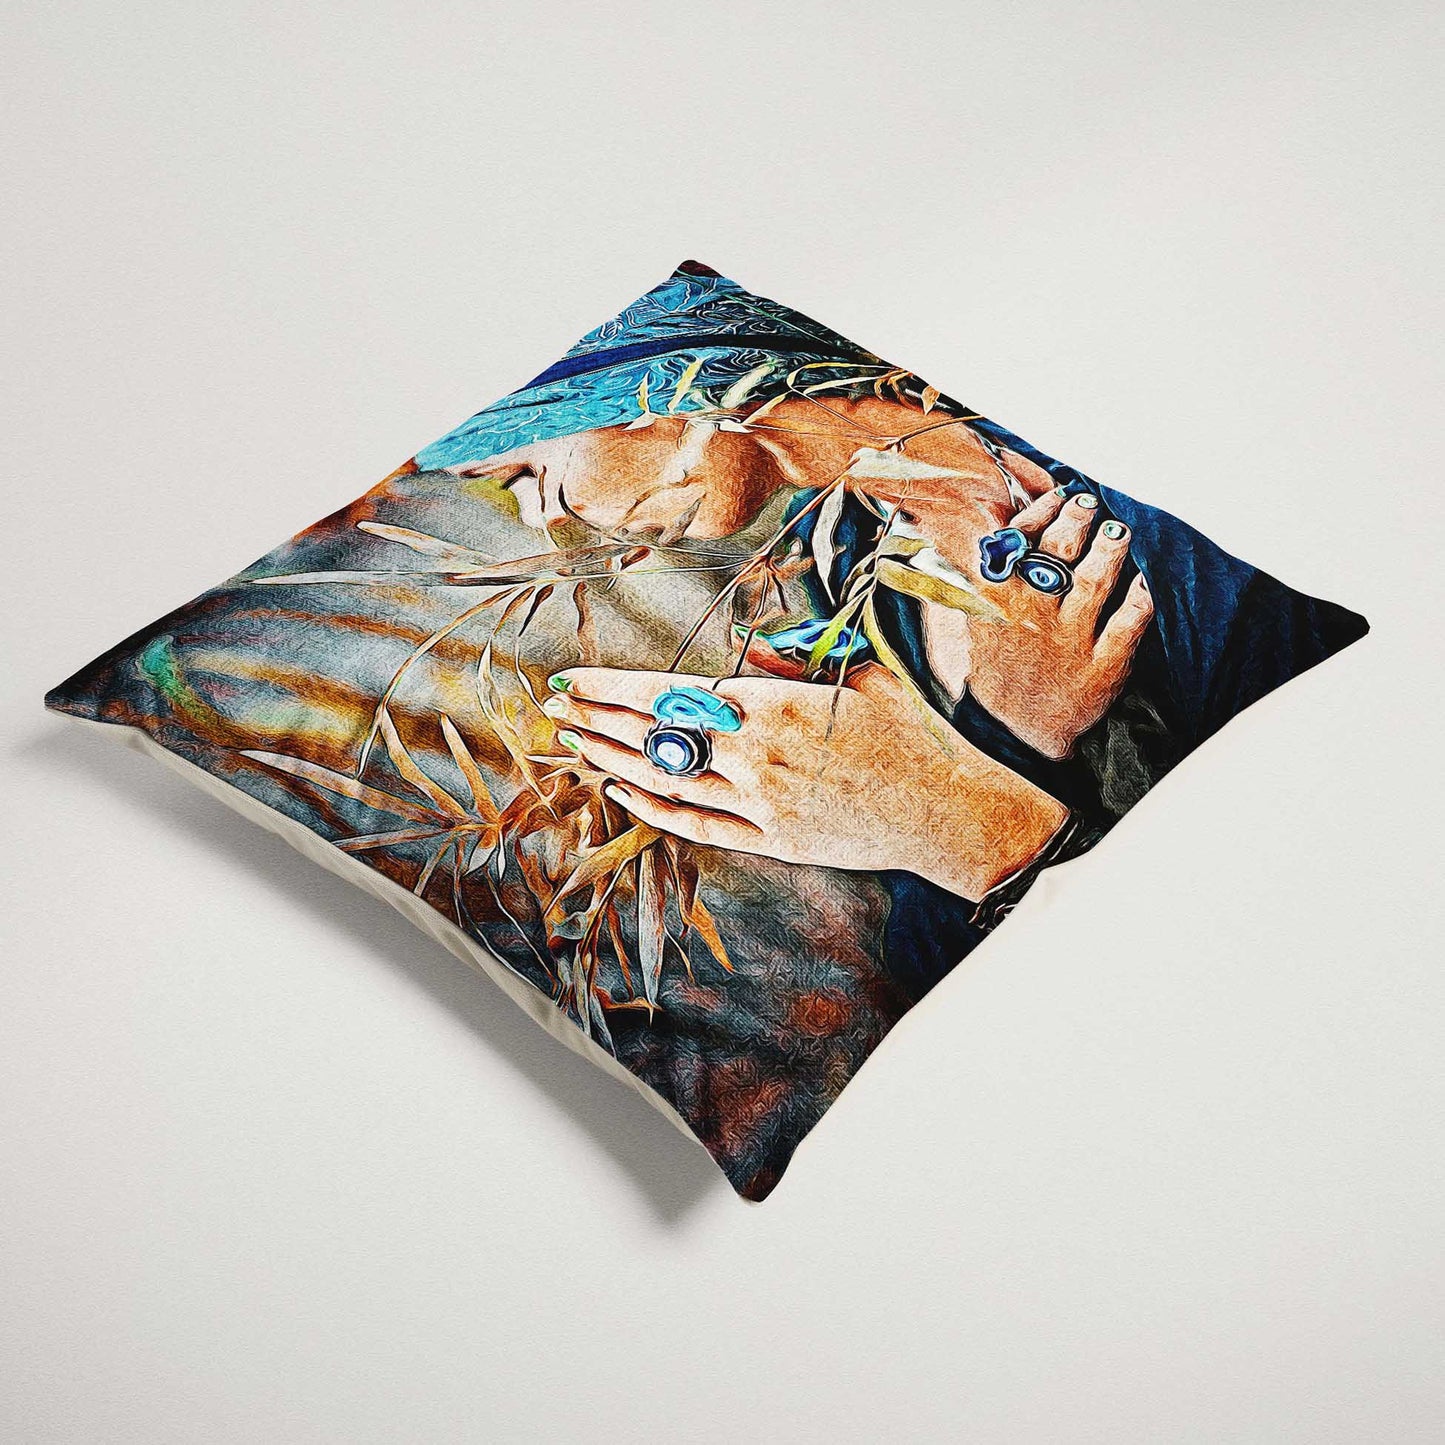 Add a touch of elegance to your home with the Personalised Original Oil Painting Cushion. This luxurious handmade cushion features a painting derived from your photo, showcasing imagination and creativity, handmade from soft velvet